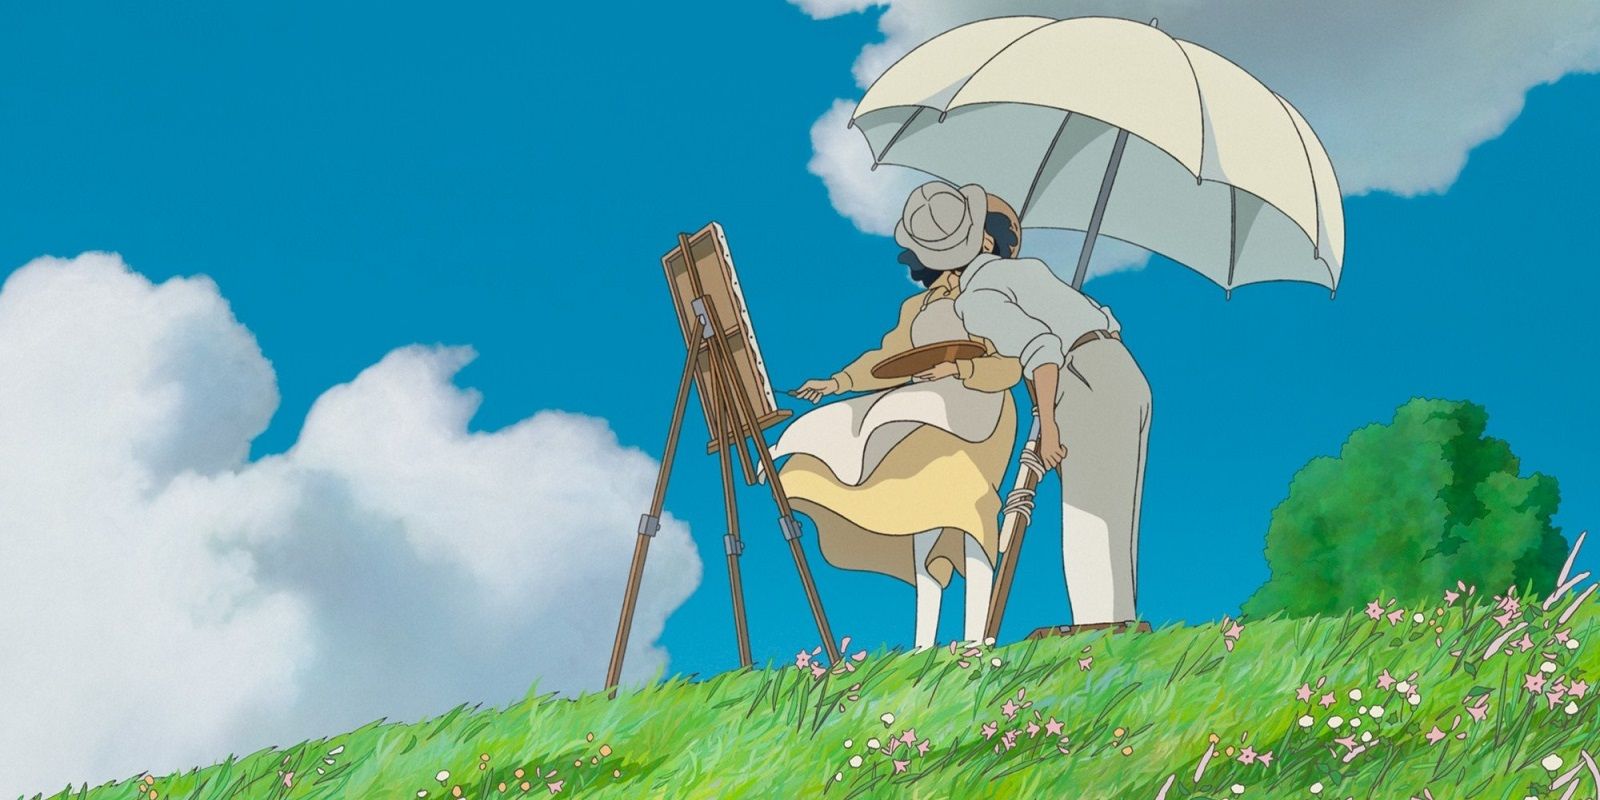 The Collected Works Of Hayao Miyazaki Every Film In The Box Set Ranked